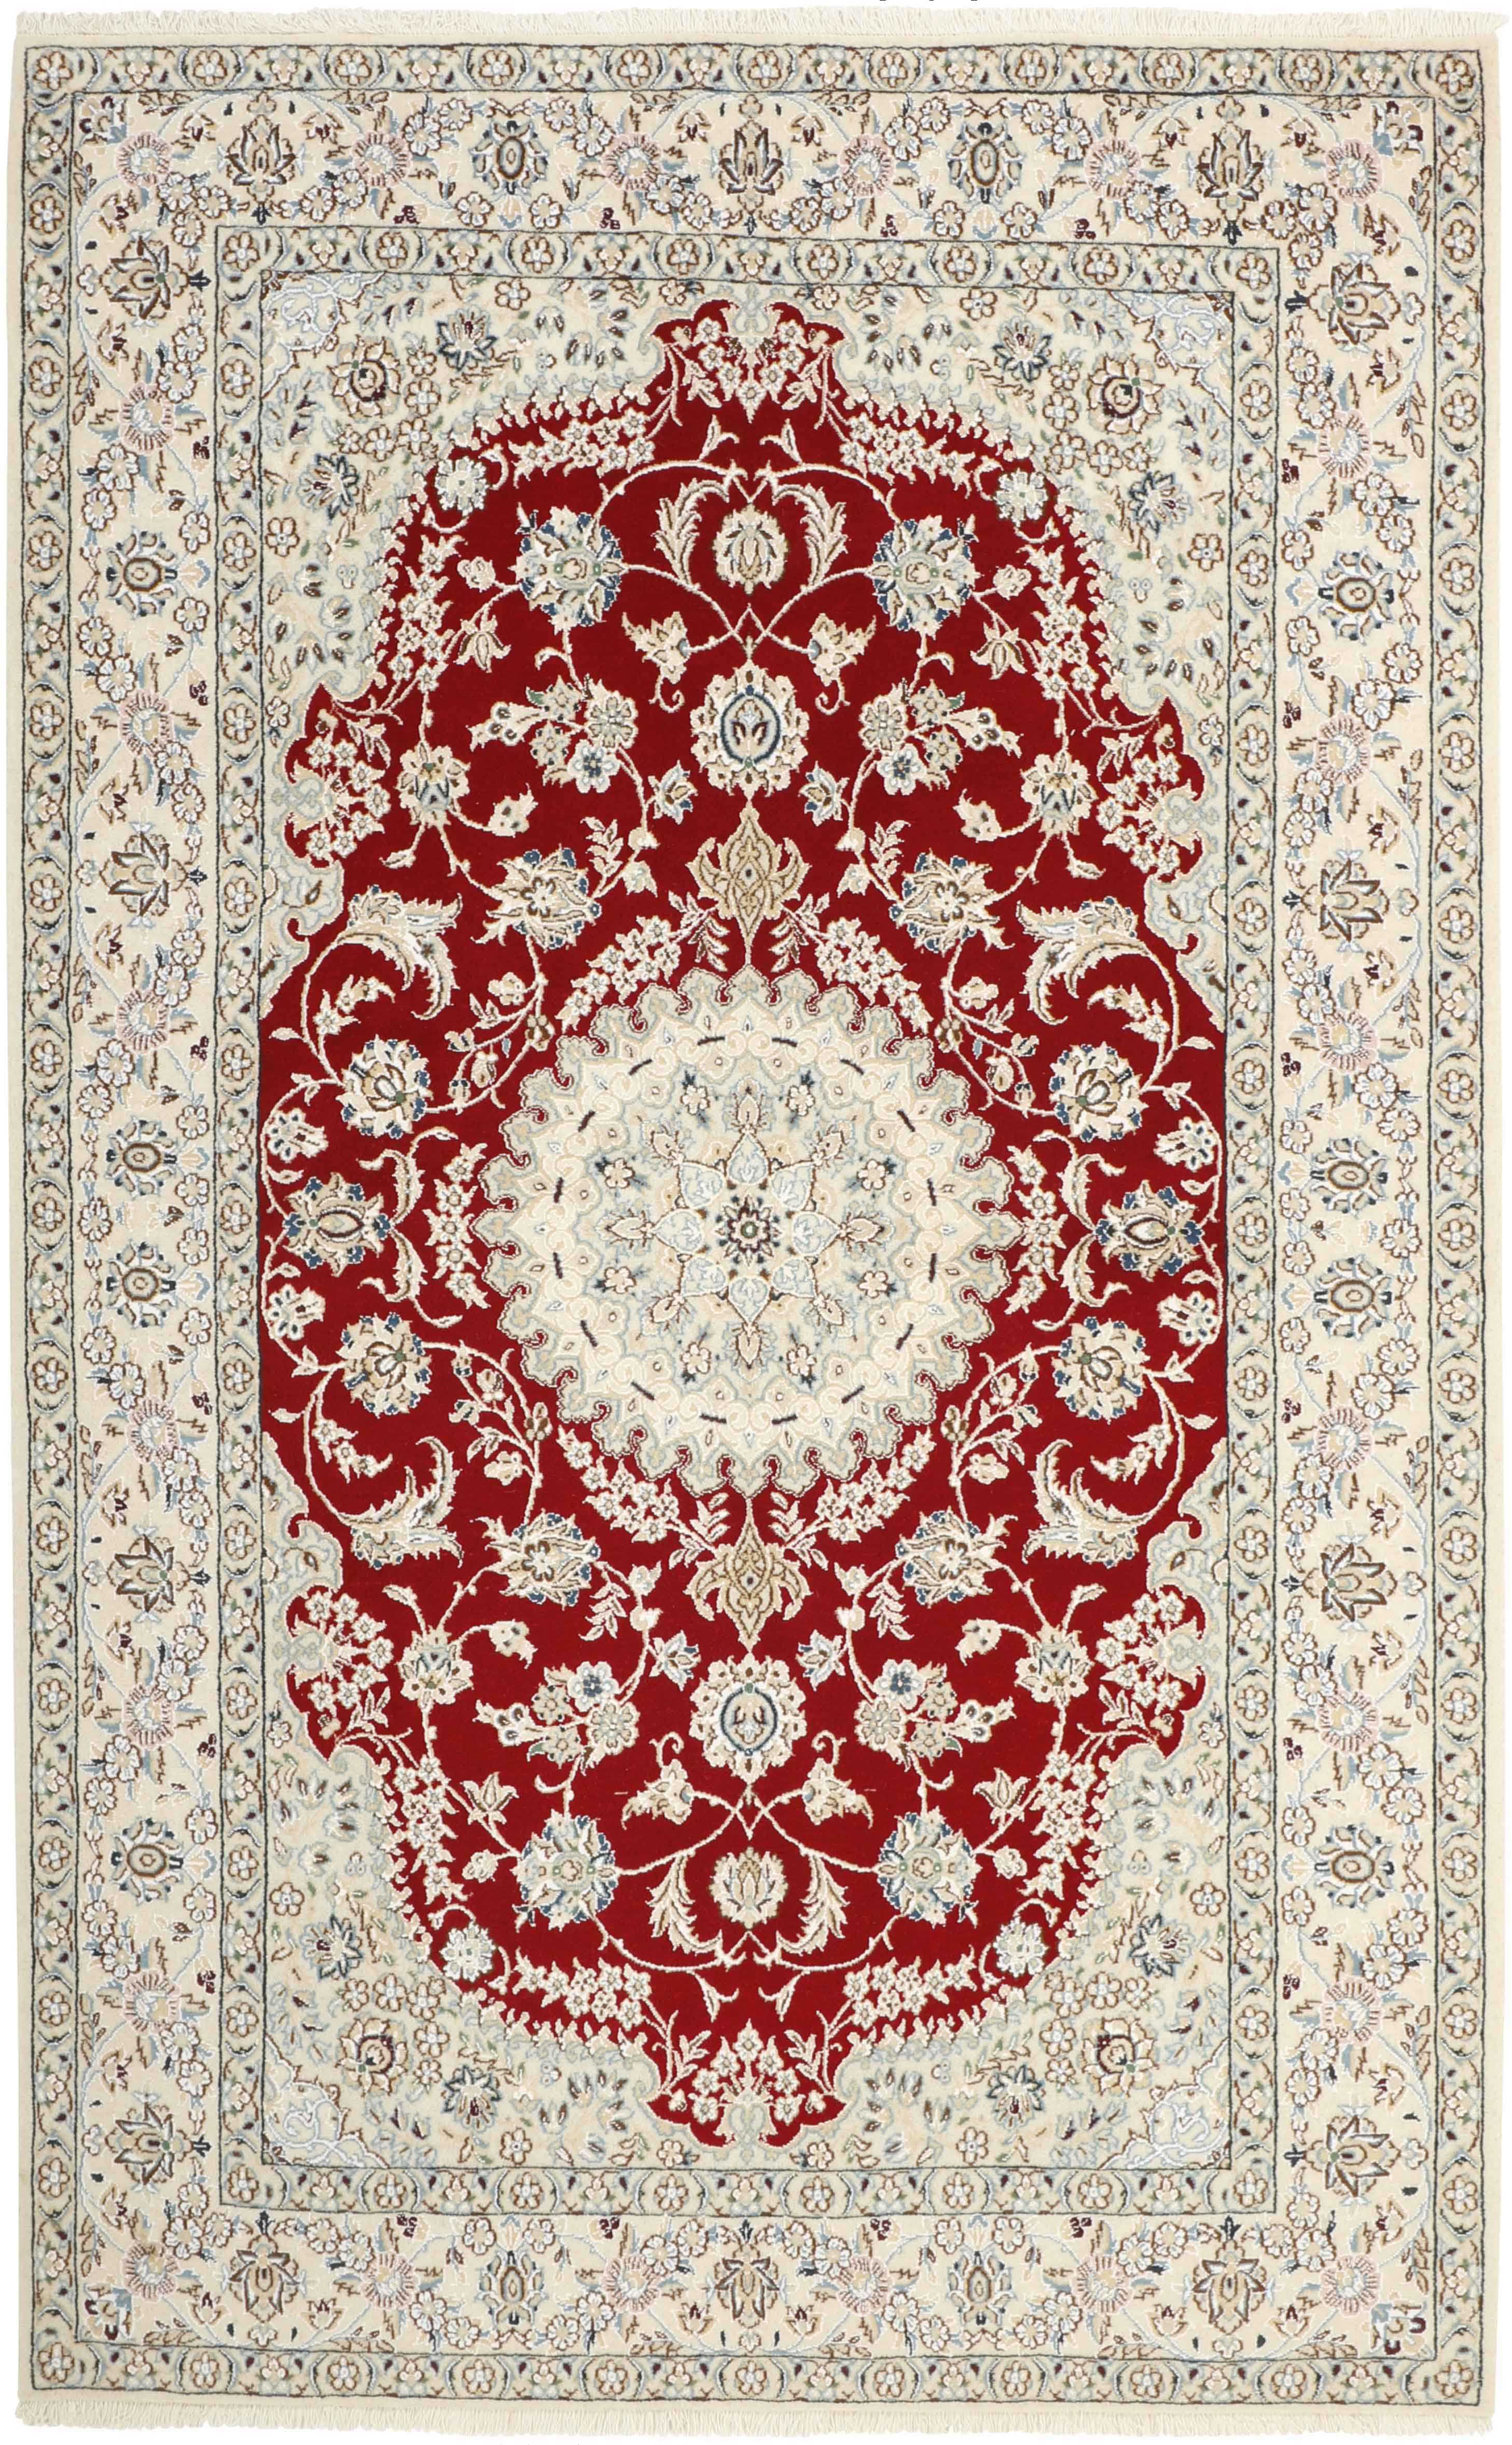 Authentic oriental rug with traditional floral design in ivory and red